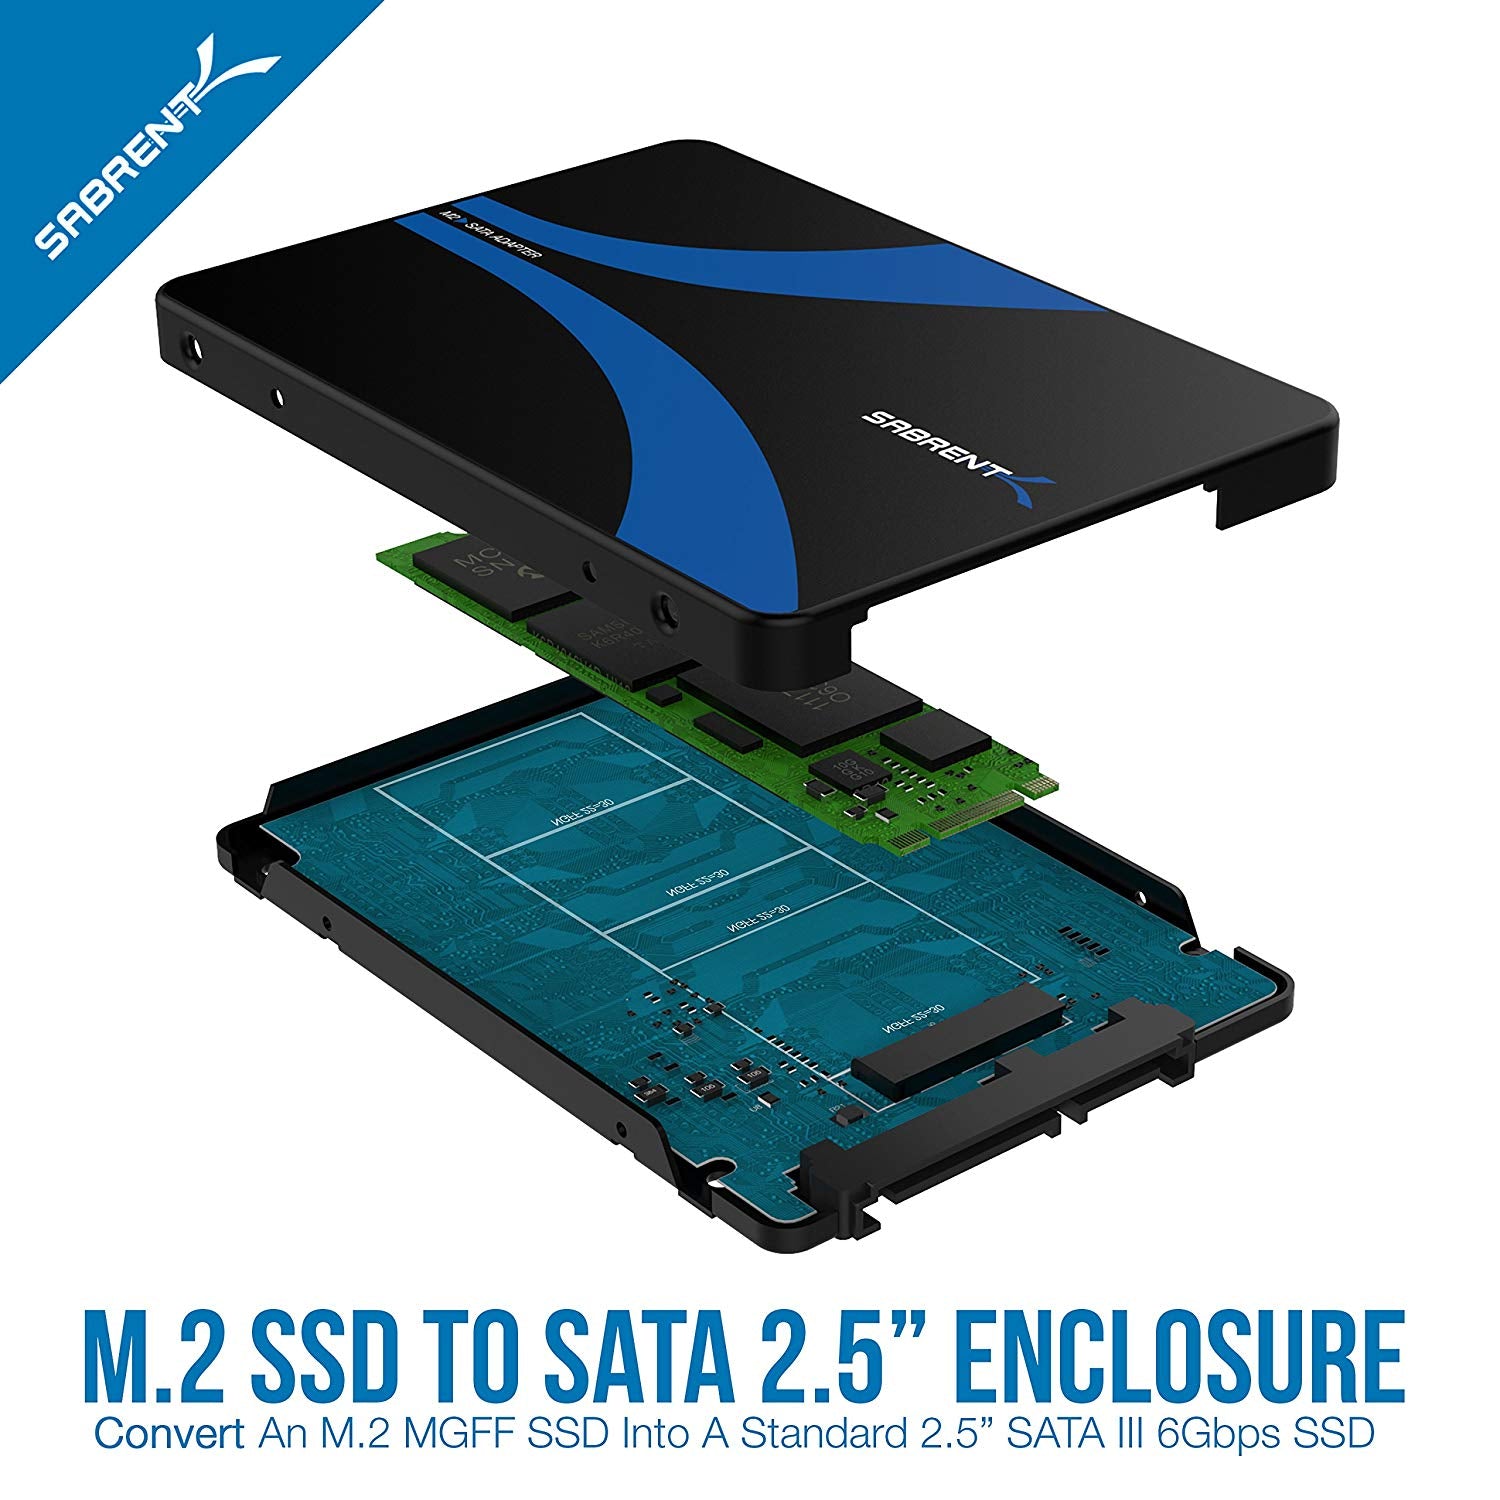 Do I have to buy the 2,5” to 3,5” adapter for SSD? – NAS Compares